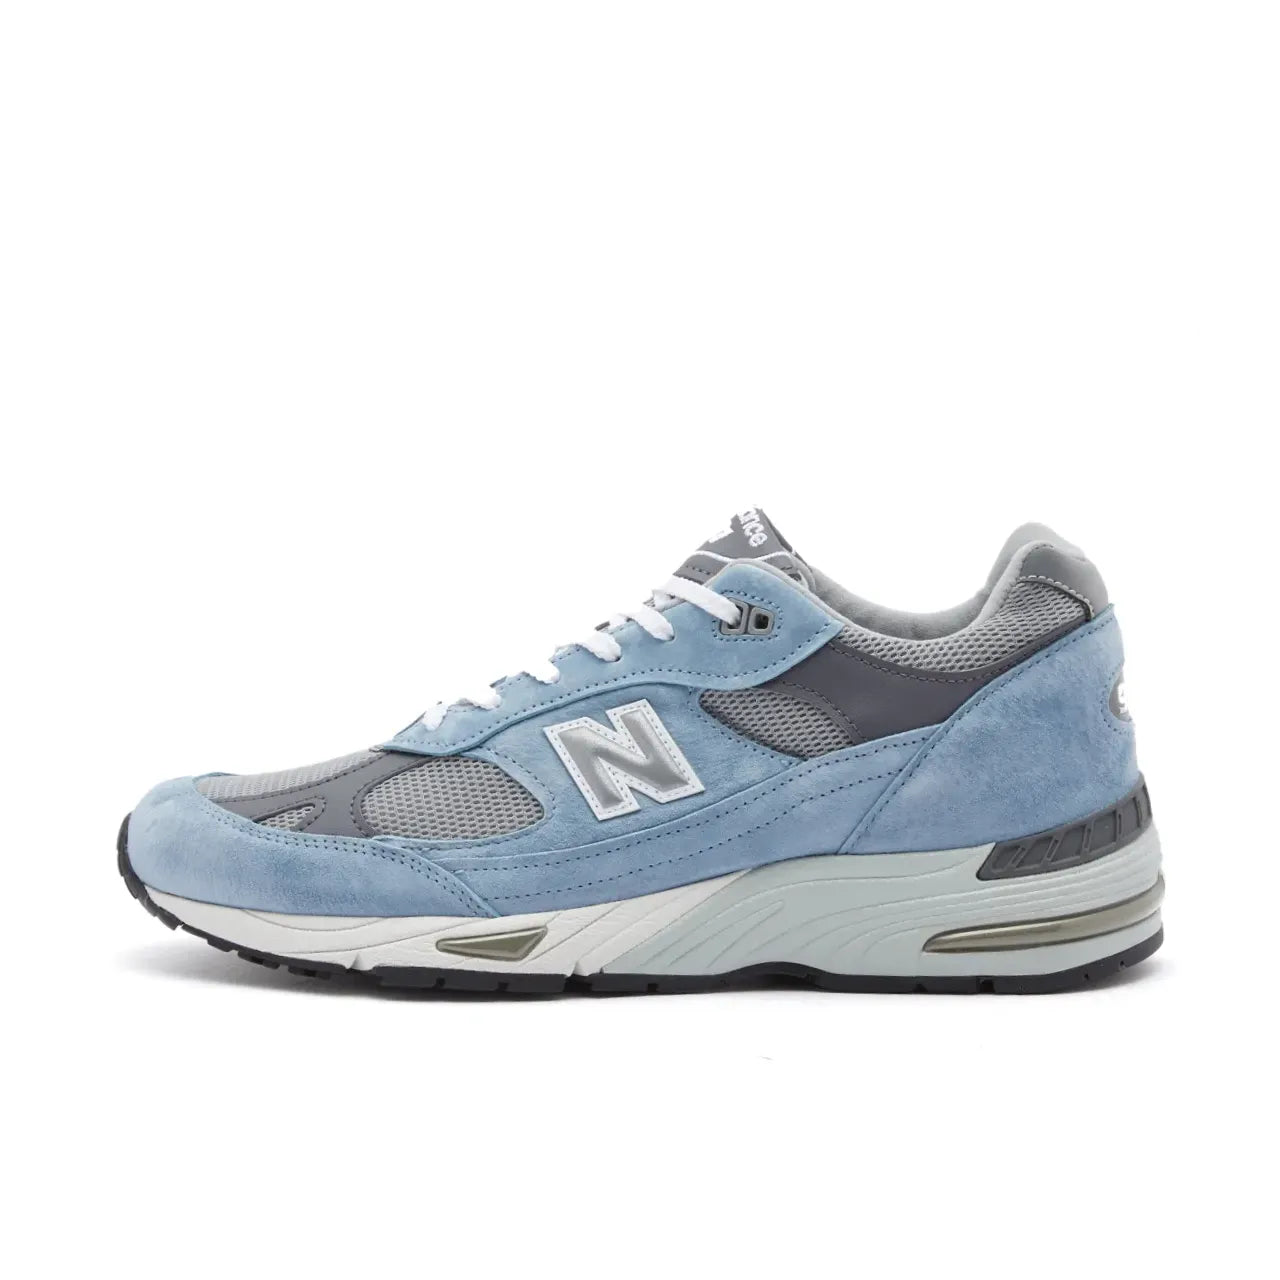 New Balance 991 Made in England Dusty Blue Alloy Smoked Pearl